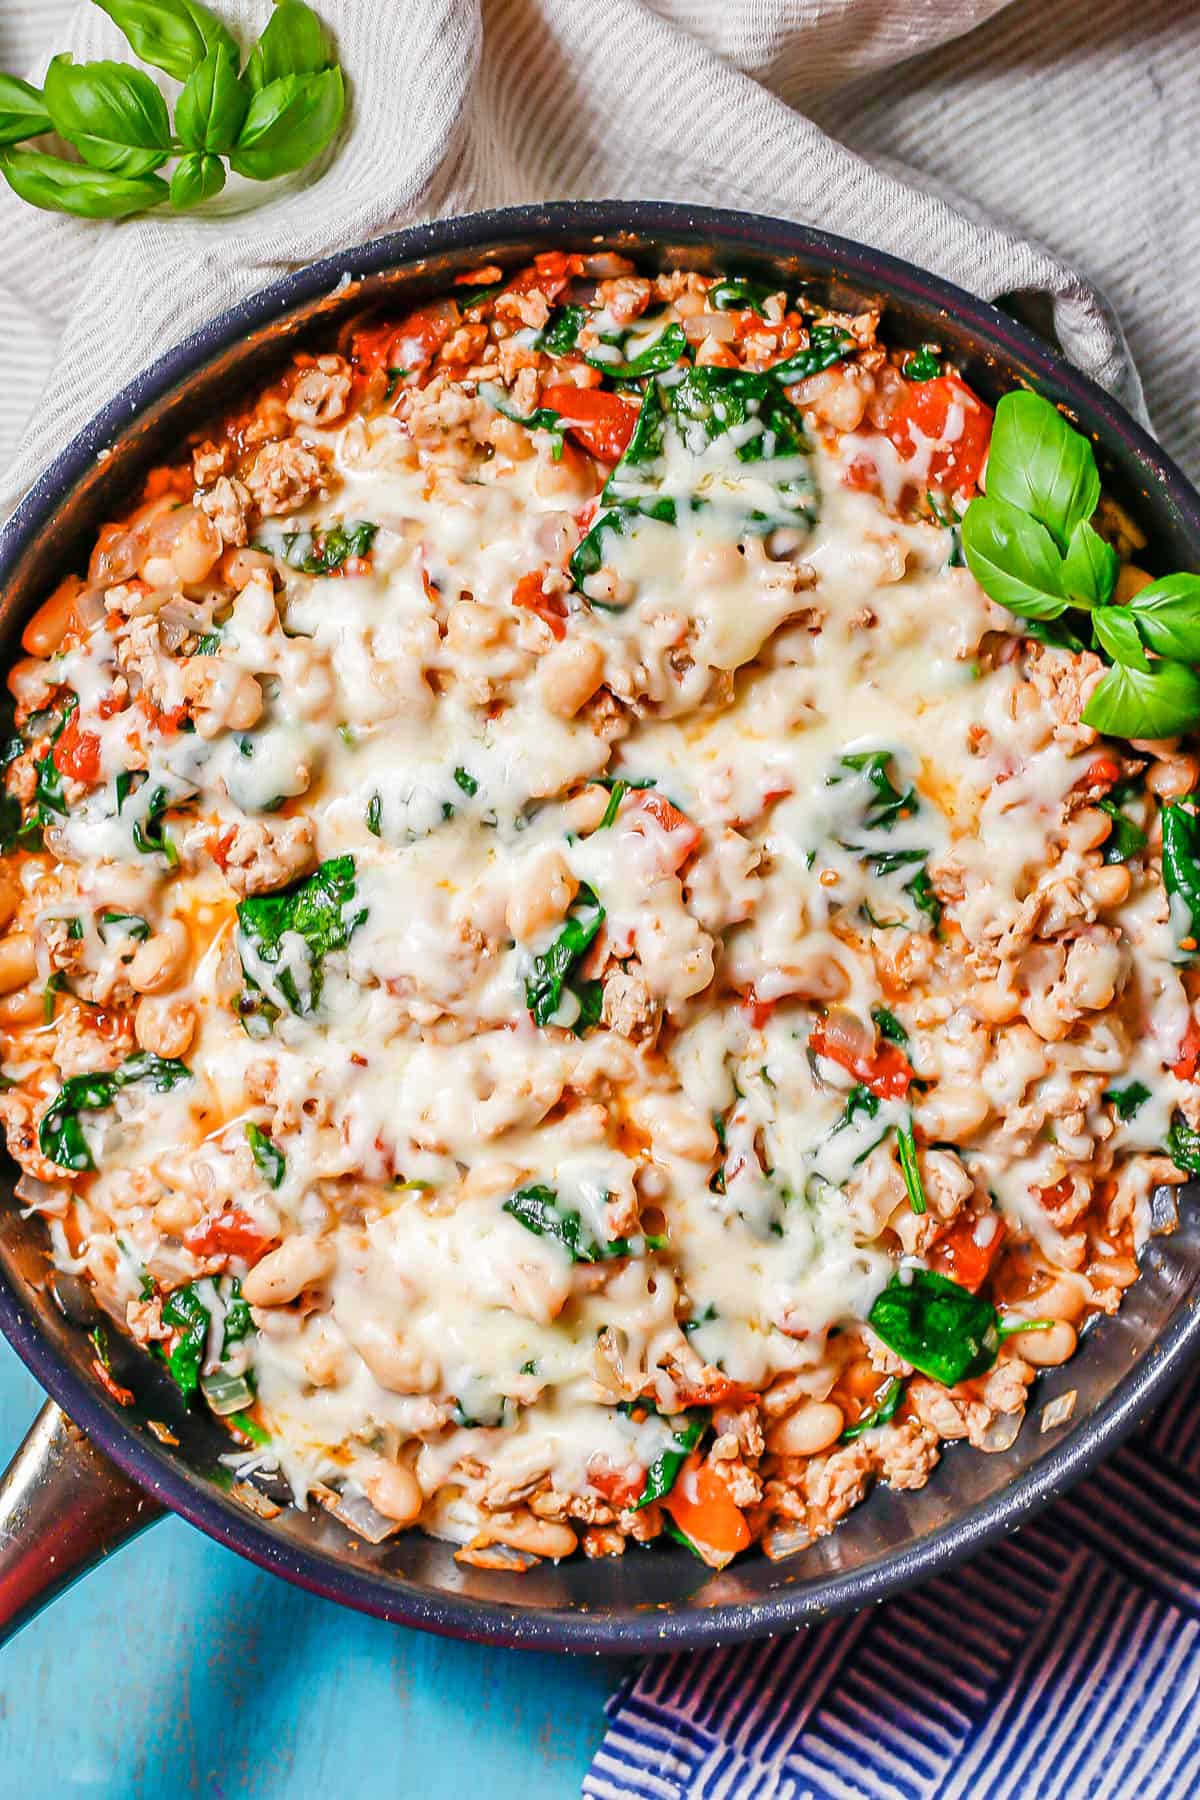 Melted mozzarella cheese on top of a mixture of ground chicken, white beans, spinach and tomatoes in a large dark pan with basil sprigs for a garnish.